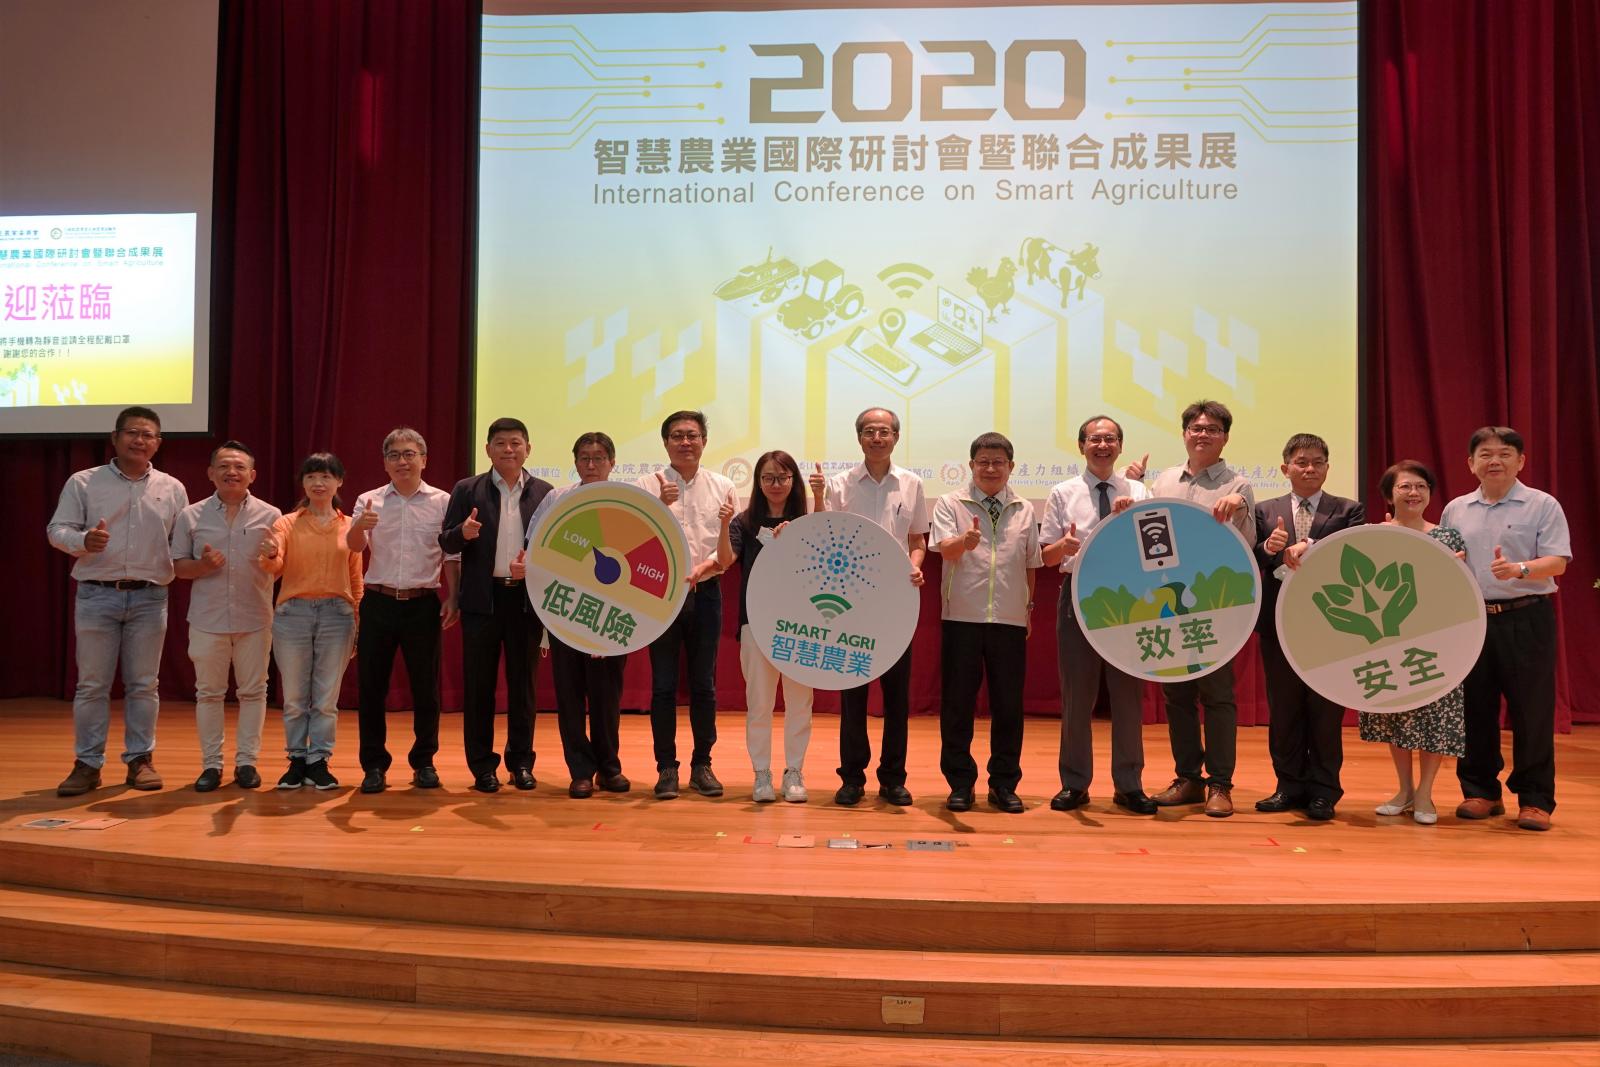 The “2020 International Conference on Smart Agriculture” opened on June 15.